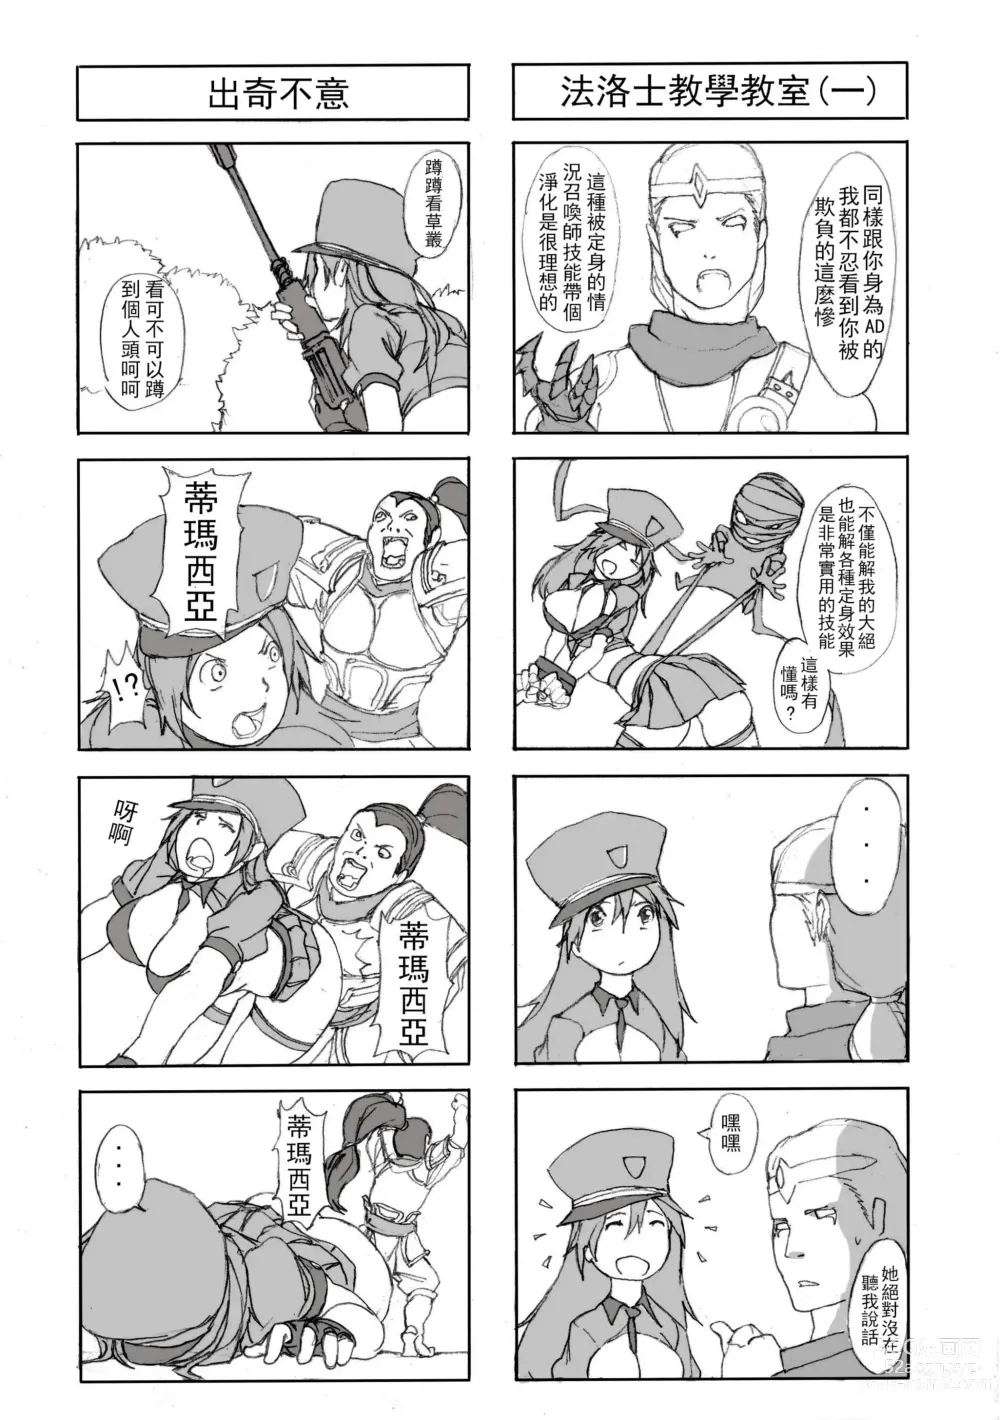 Page 21 of doujinshi 凱特琳壞壞 (League of Legends) [無修正]中文